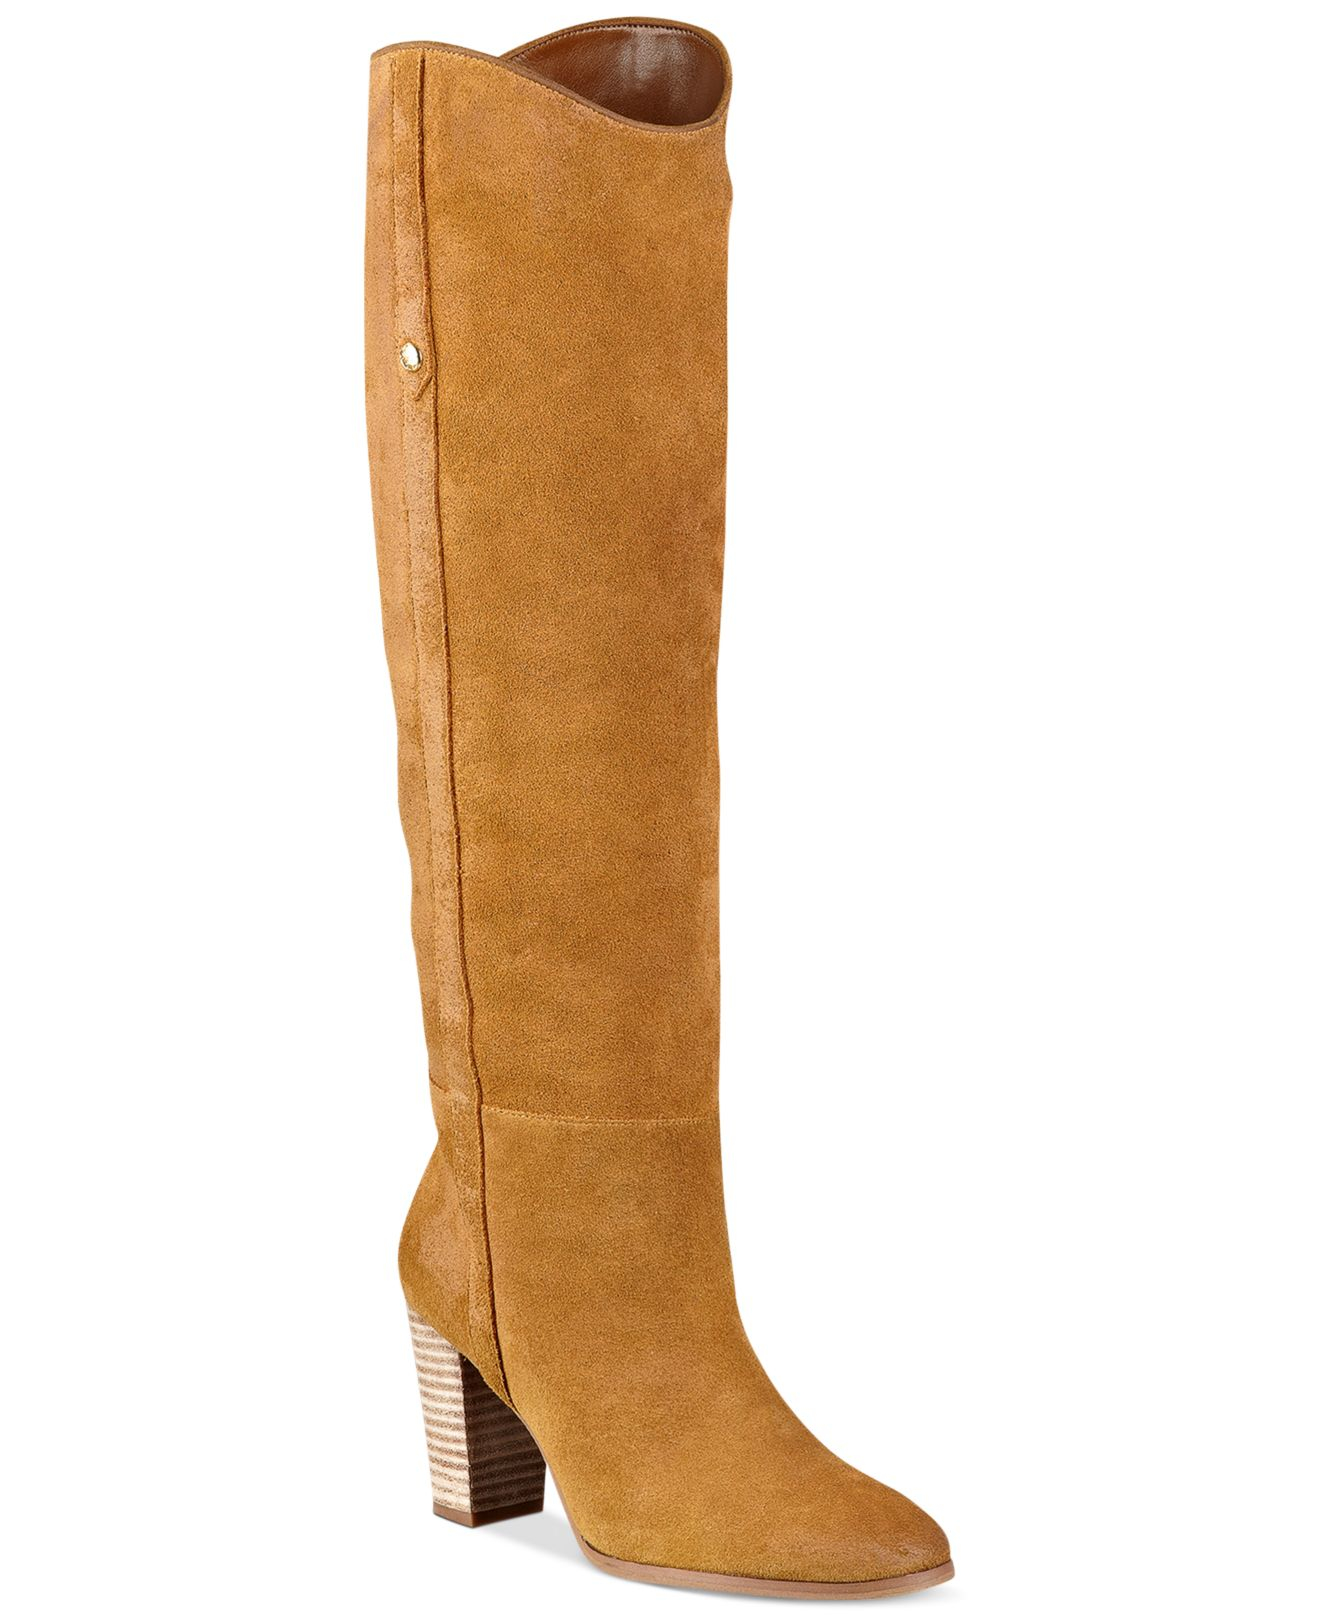 Guess Women's Honon Suede Tall Boots in Natural - Lyst